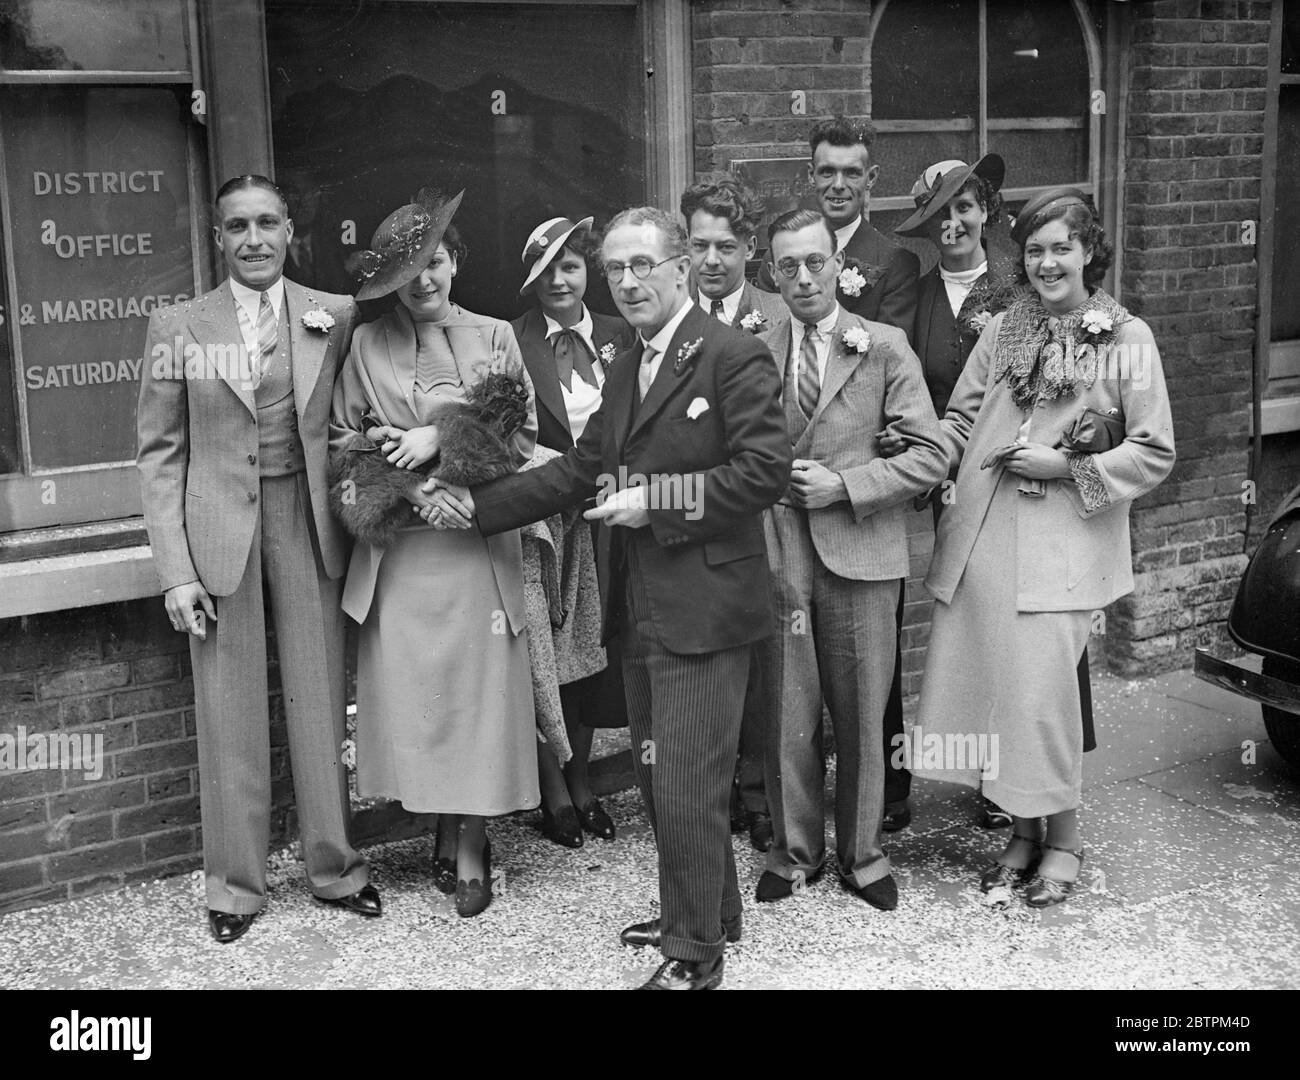 Mass Weddings At Tottenham One of the busiest spots this Whitsun proved to be the Tottenham Register Office , where 40 couples were married by the popular Mr . W . Grimaldi , the Tottenham Registrar . Photo Shows : Mr . Walter Crimaldi congratulating some of the happy couples outside the Register Office . 30 May 1936 Stock Photo